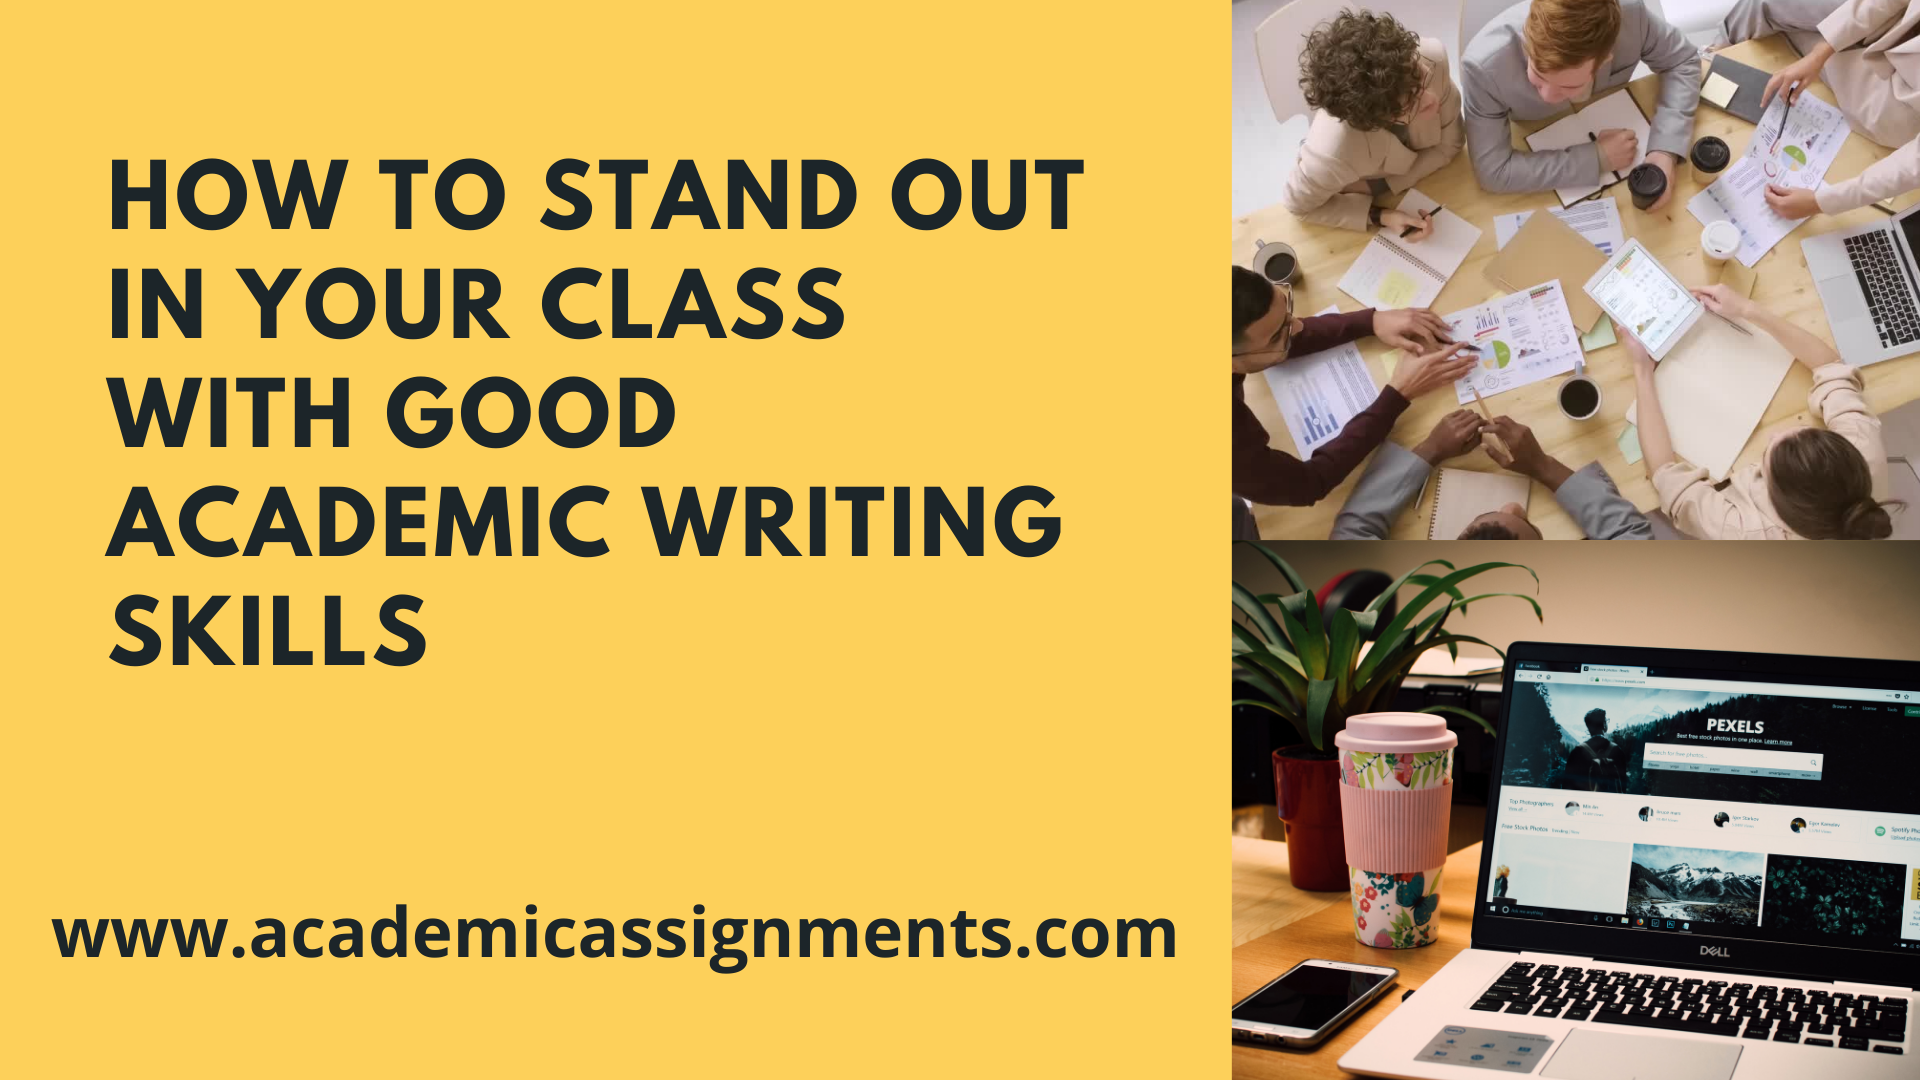 How To Stand Out In Your Class With Good Academic Writing Skills